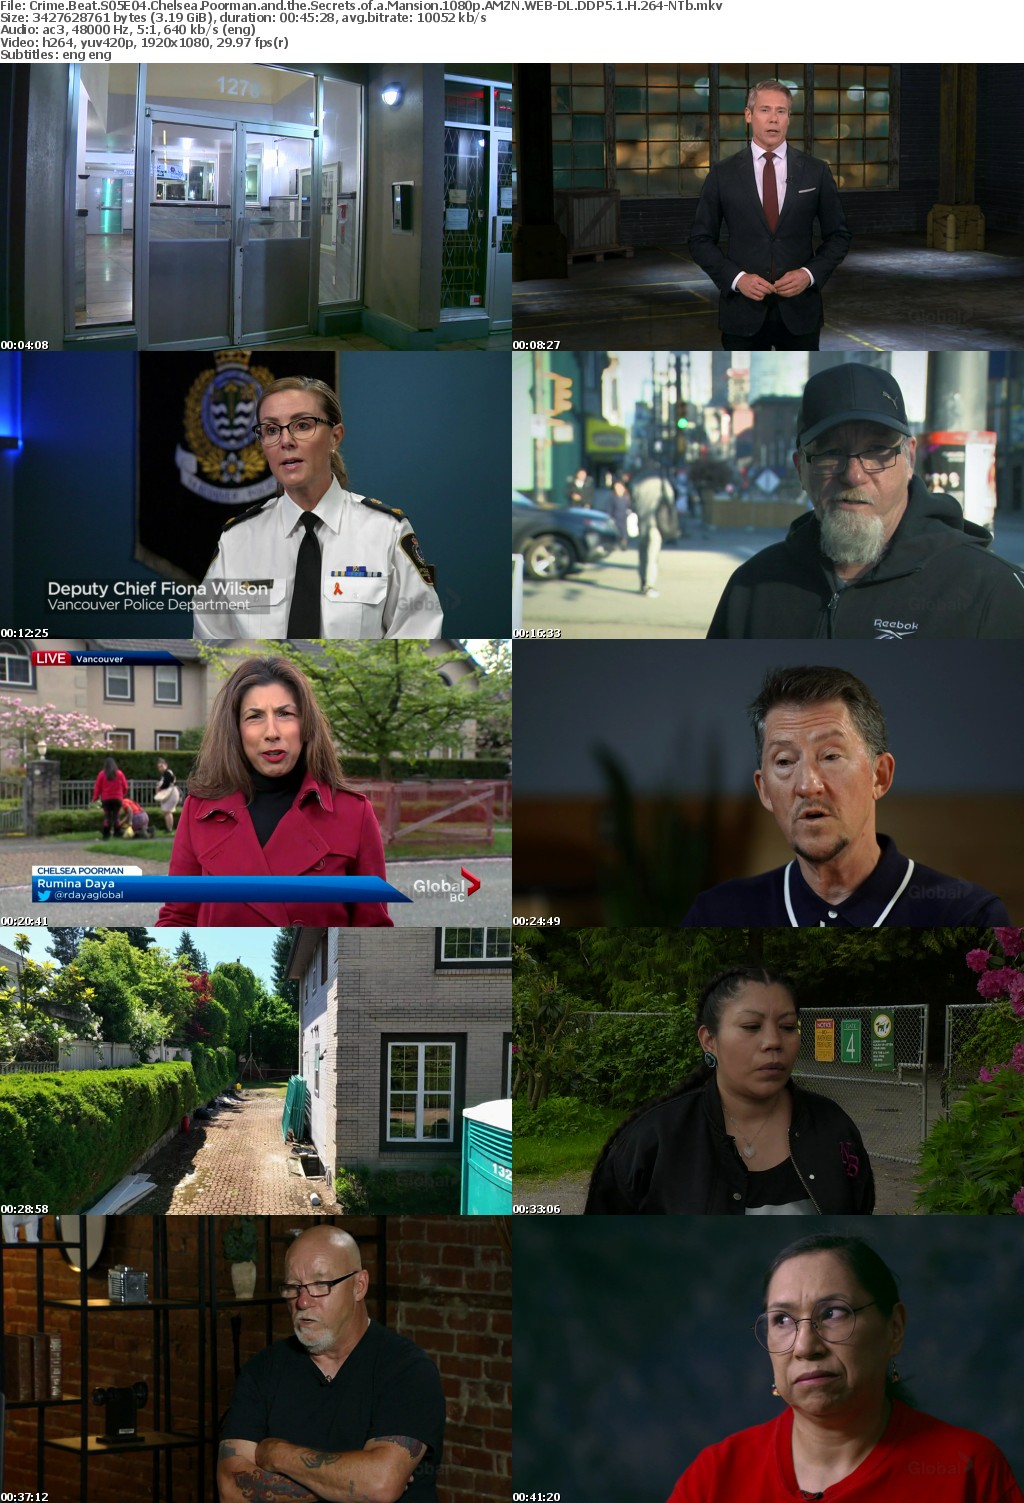 Crime Beat S05E04 Chelsea Poorman and the Secrets of a Mansion 1080p AMZN WEB-DL DDP5 1 H 264-NTb